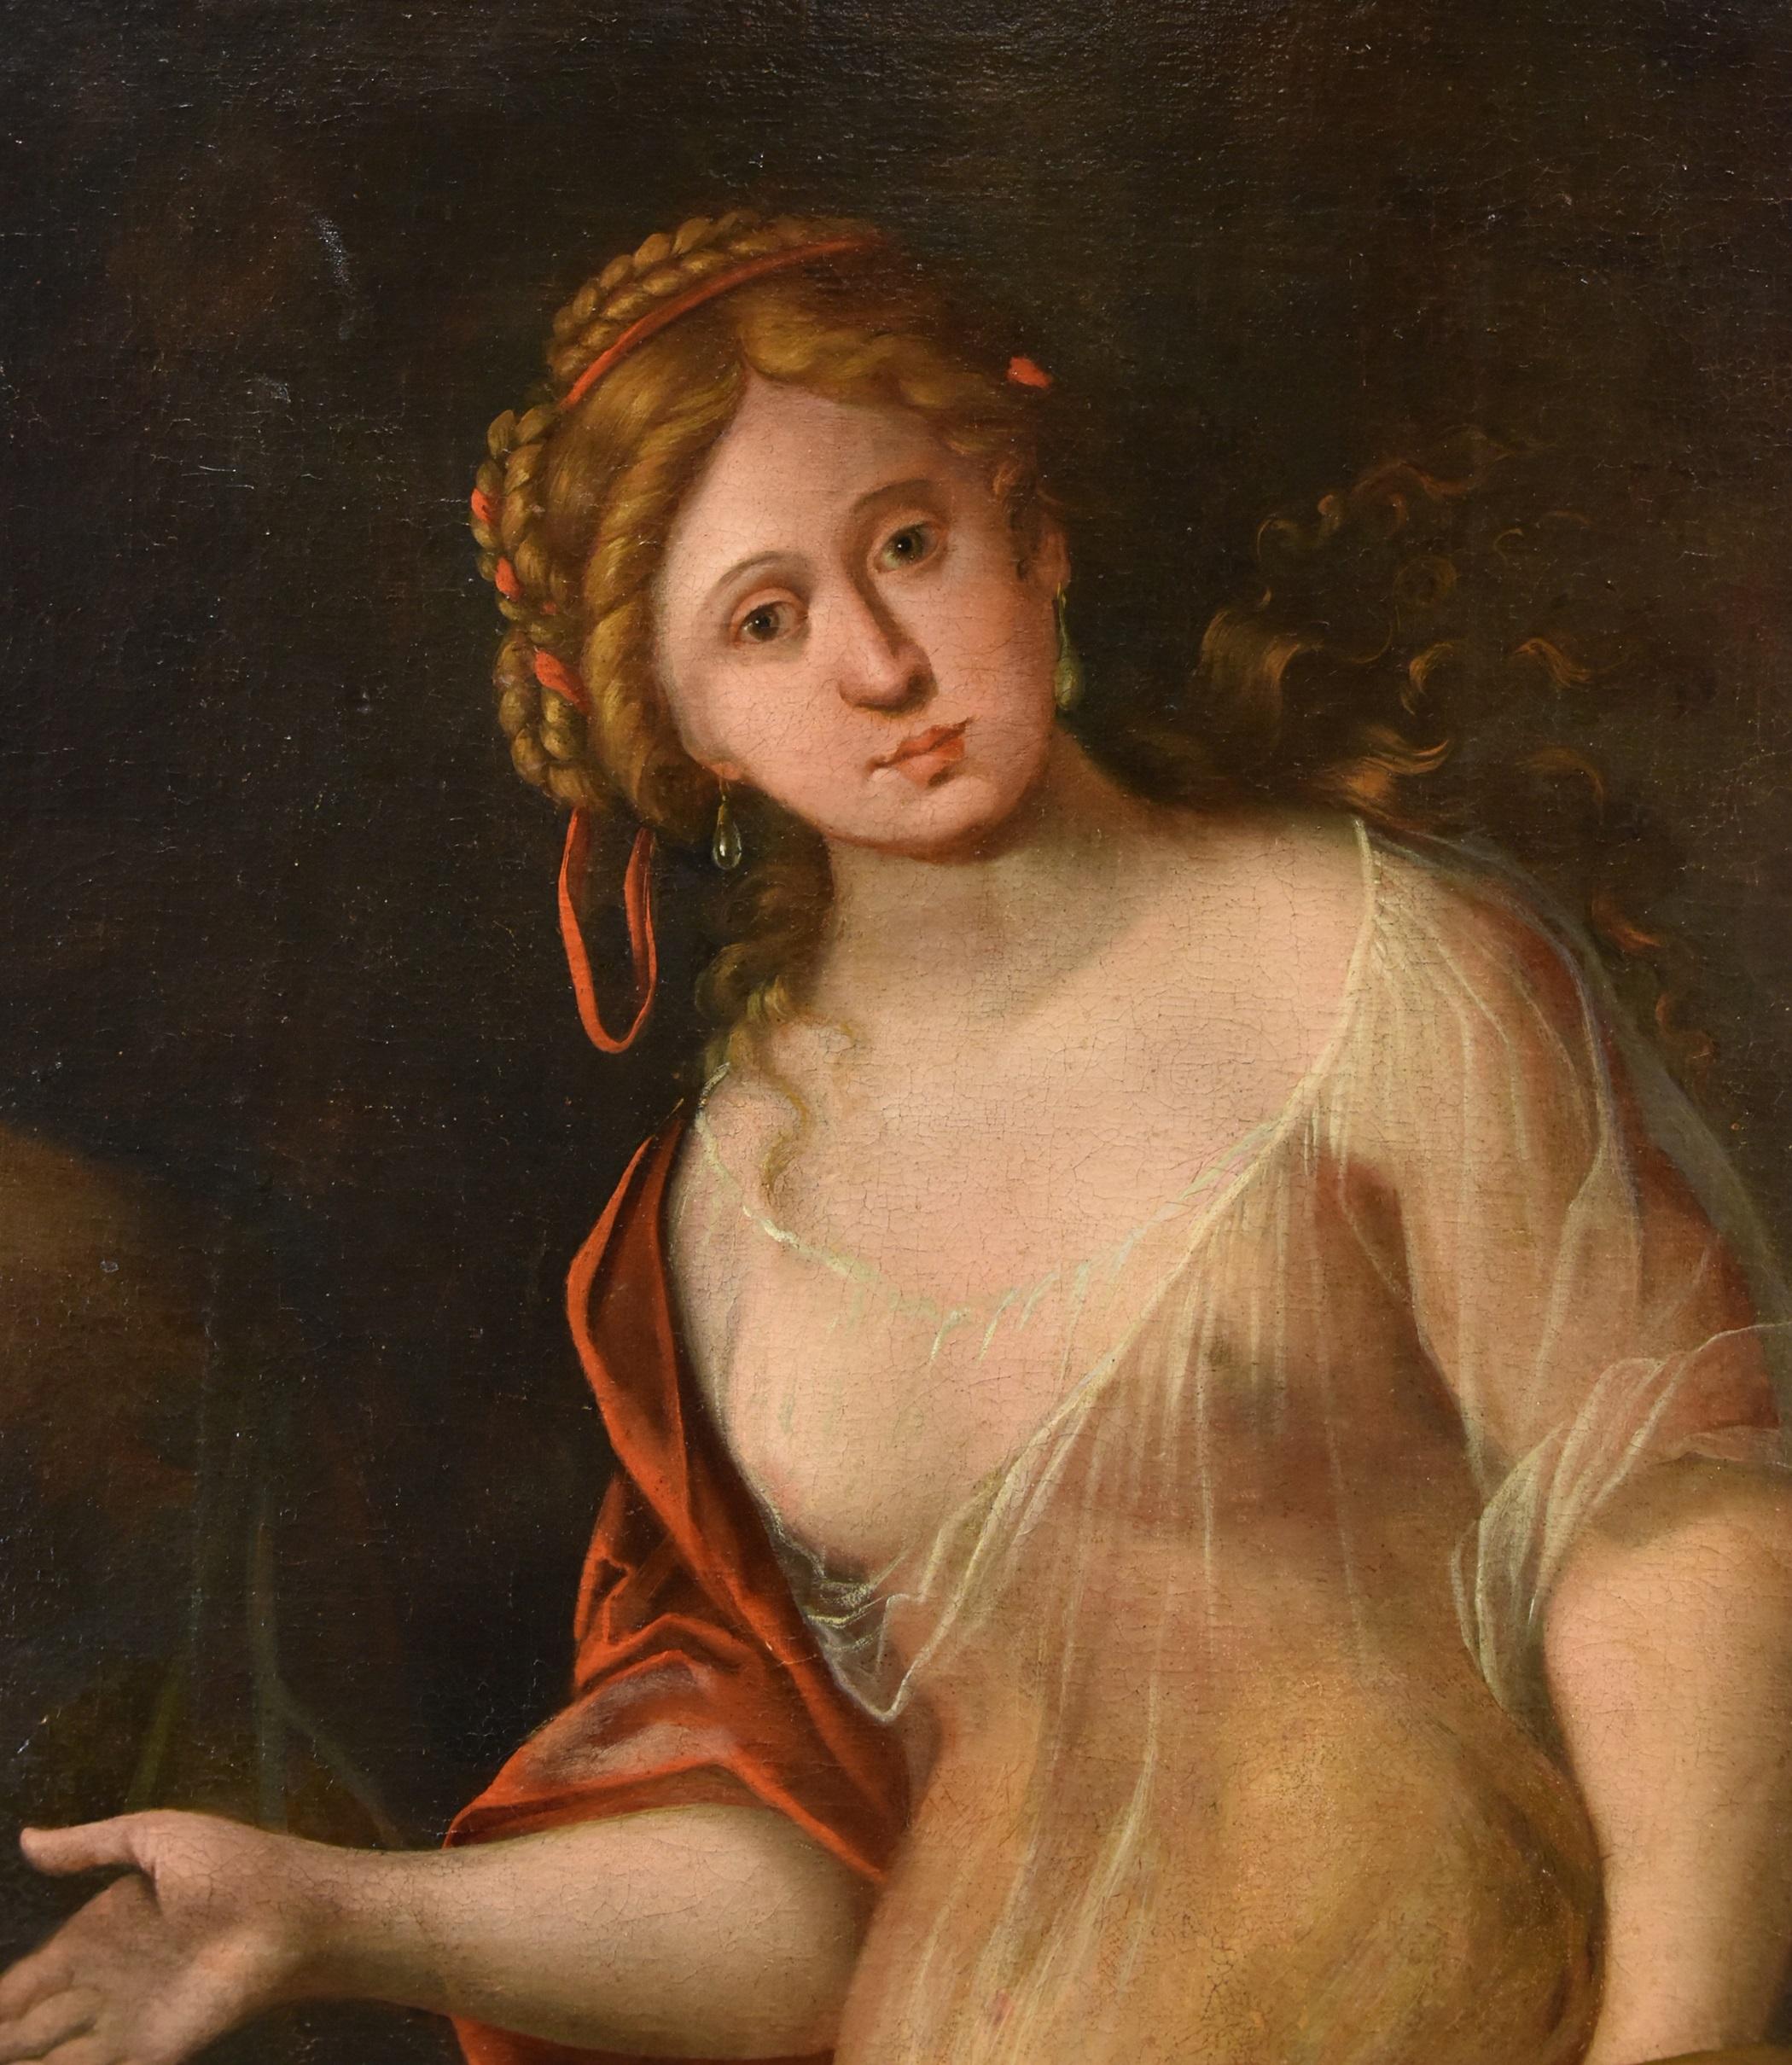 Terwesten Woman Allegory Art Paint Oil on canvas 17/18th Century Old master  For Sale 1